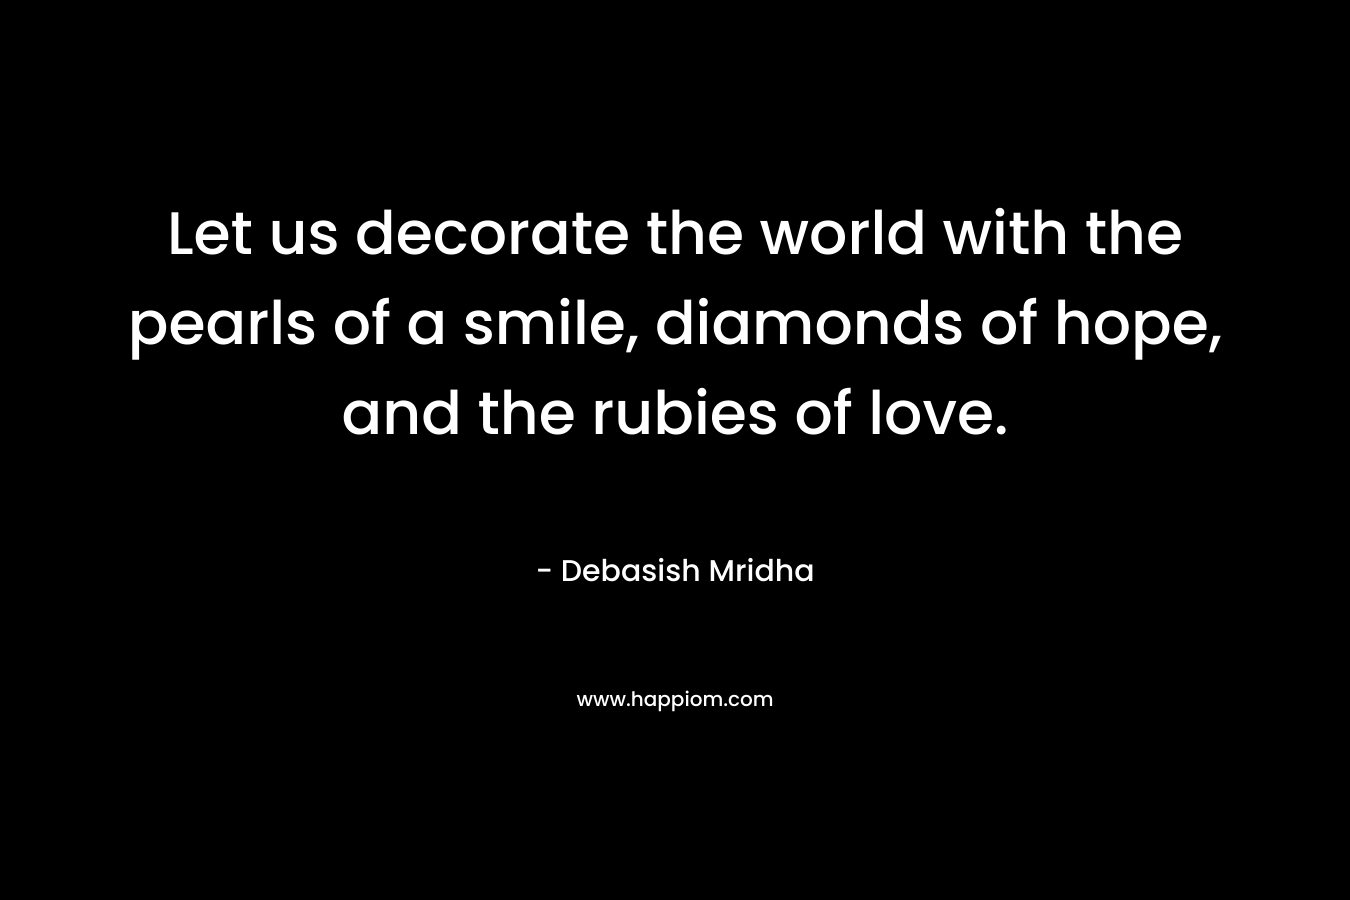 Let us decorate the world with the pearls of a smile, diamonds of hope, and the rubies of love. – Debasish Mridha